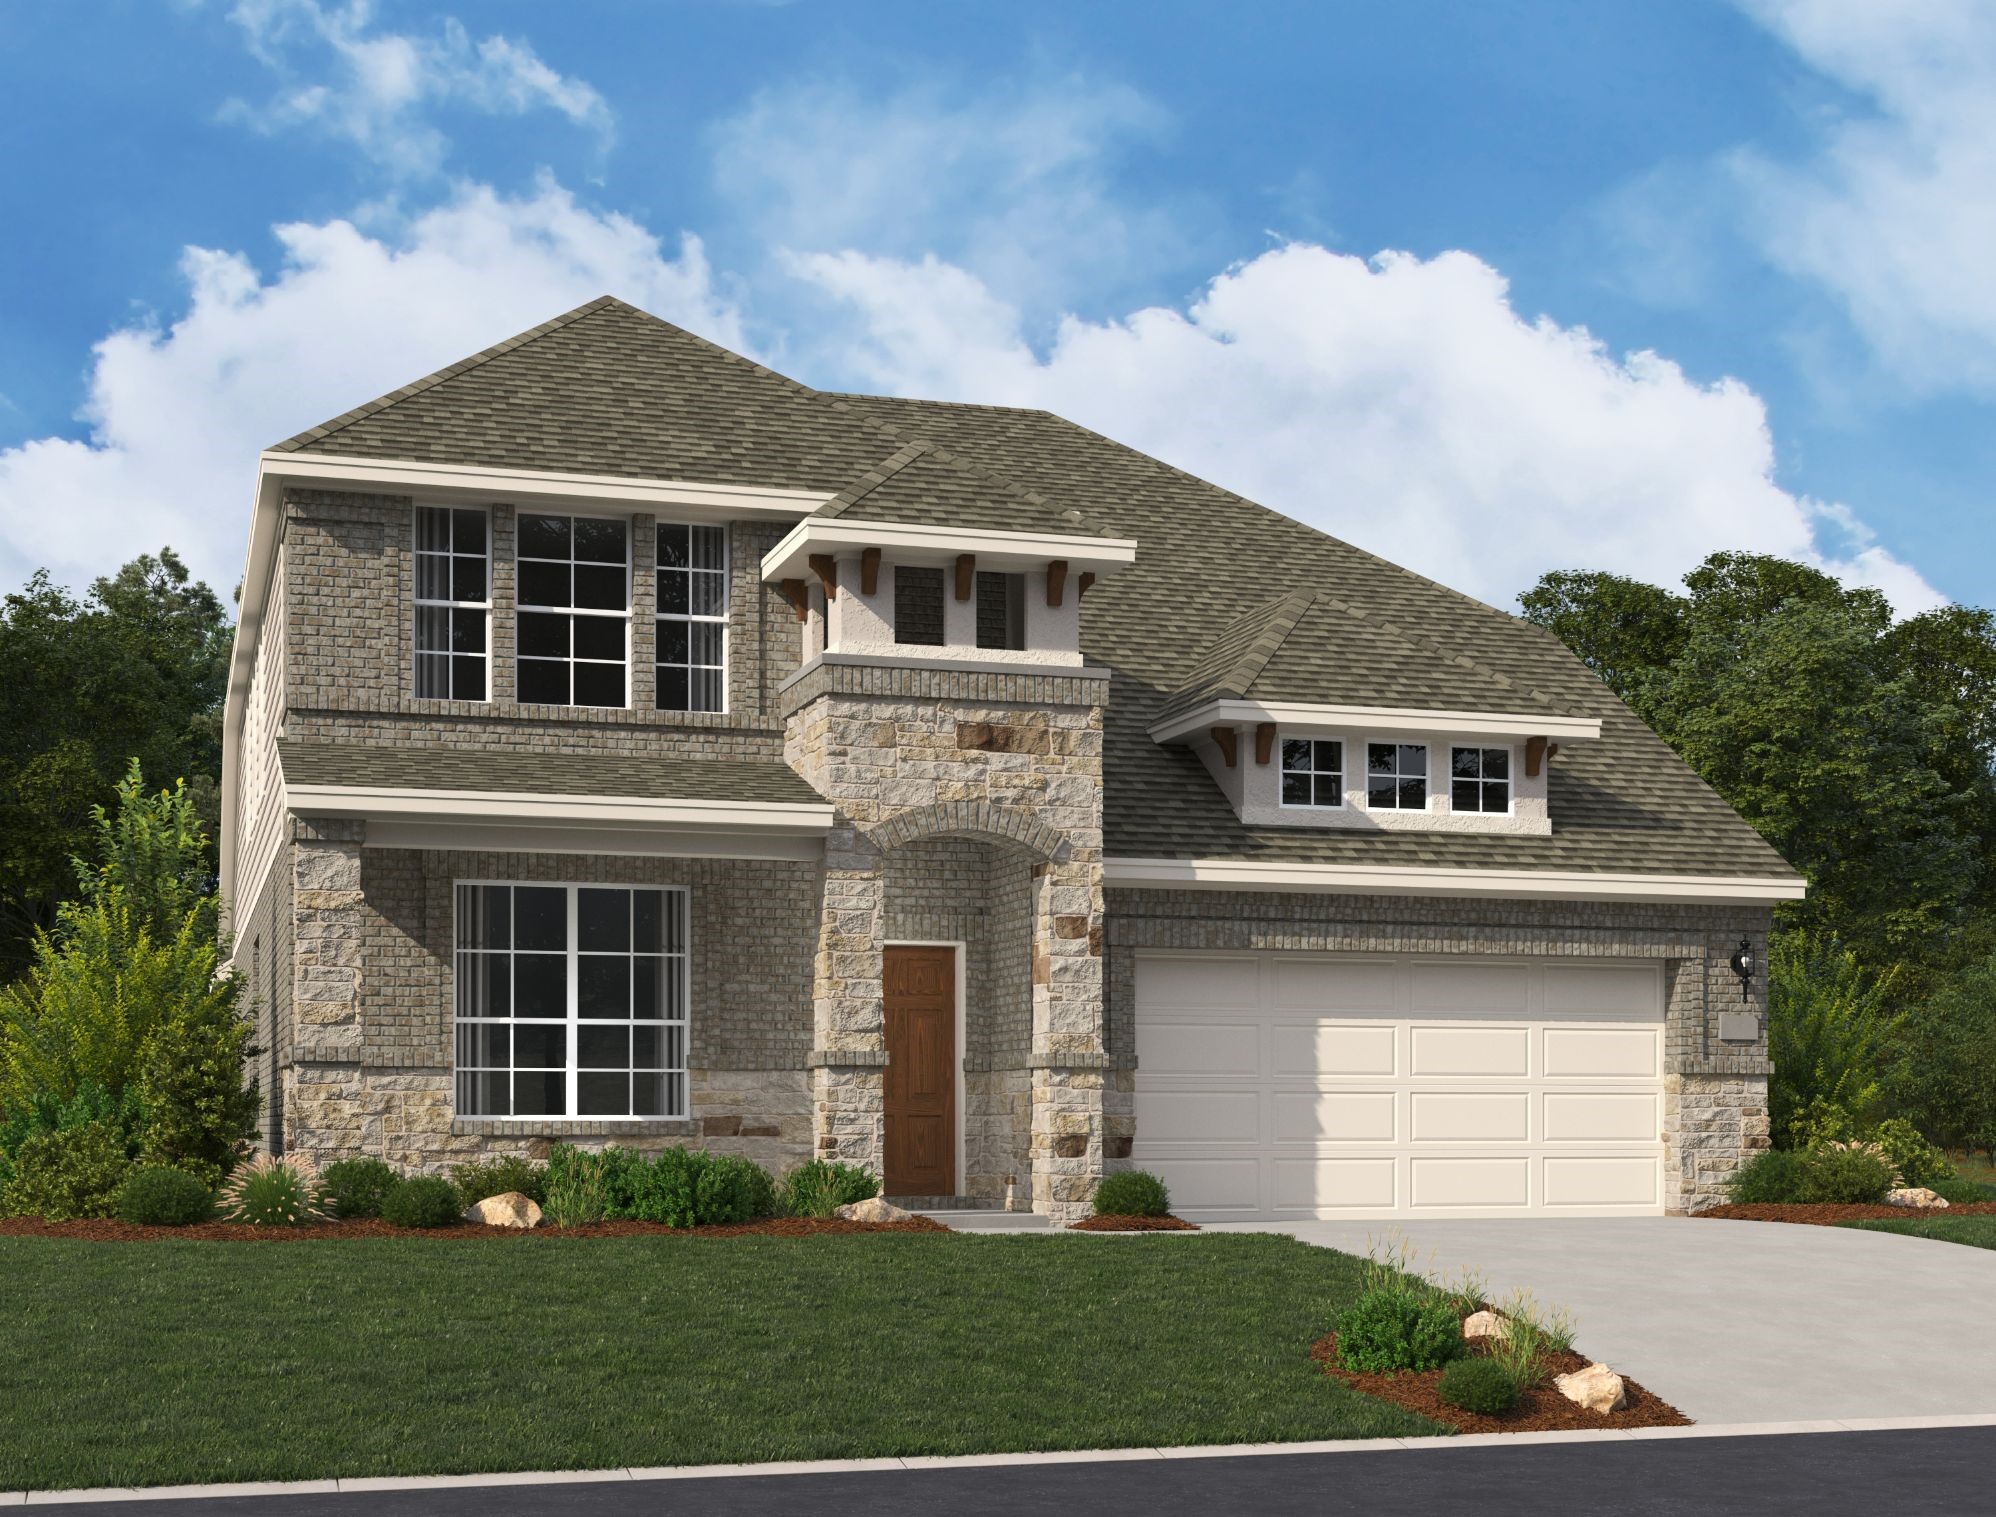 Welcome home to 32327 Elmwood Manor located in the Oakwood Estates community zoned to Waller ISD.